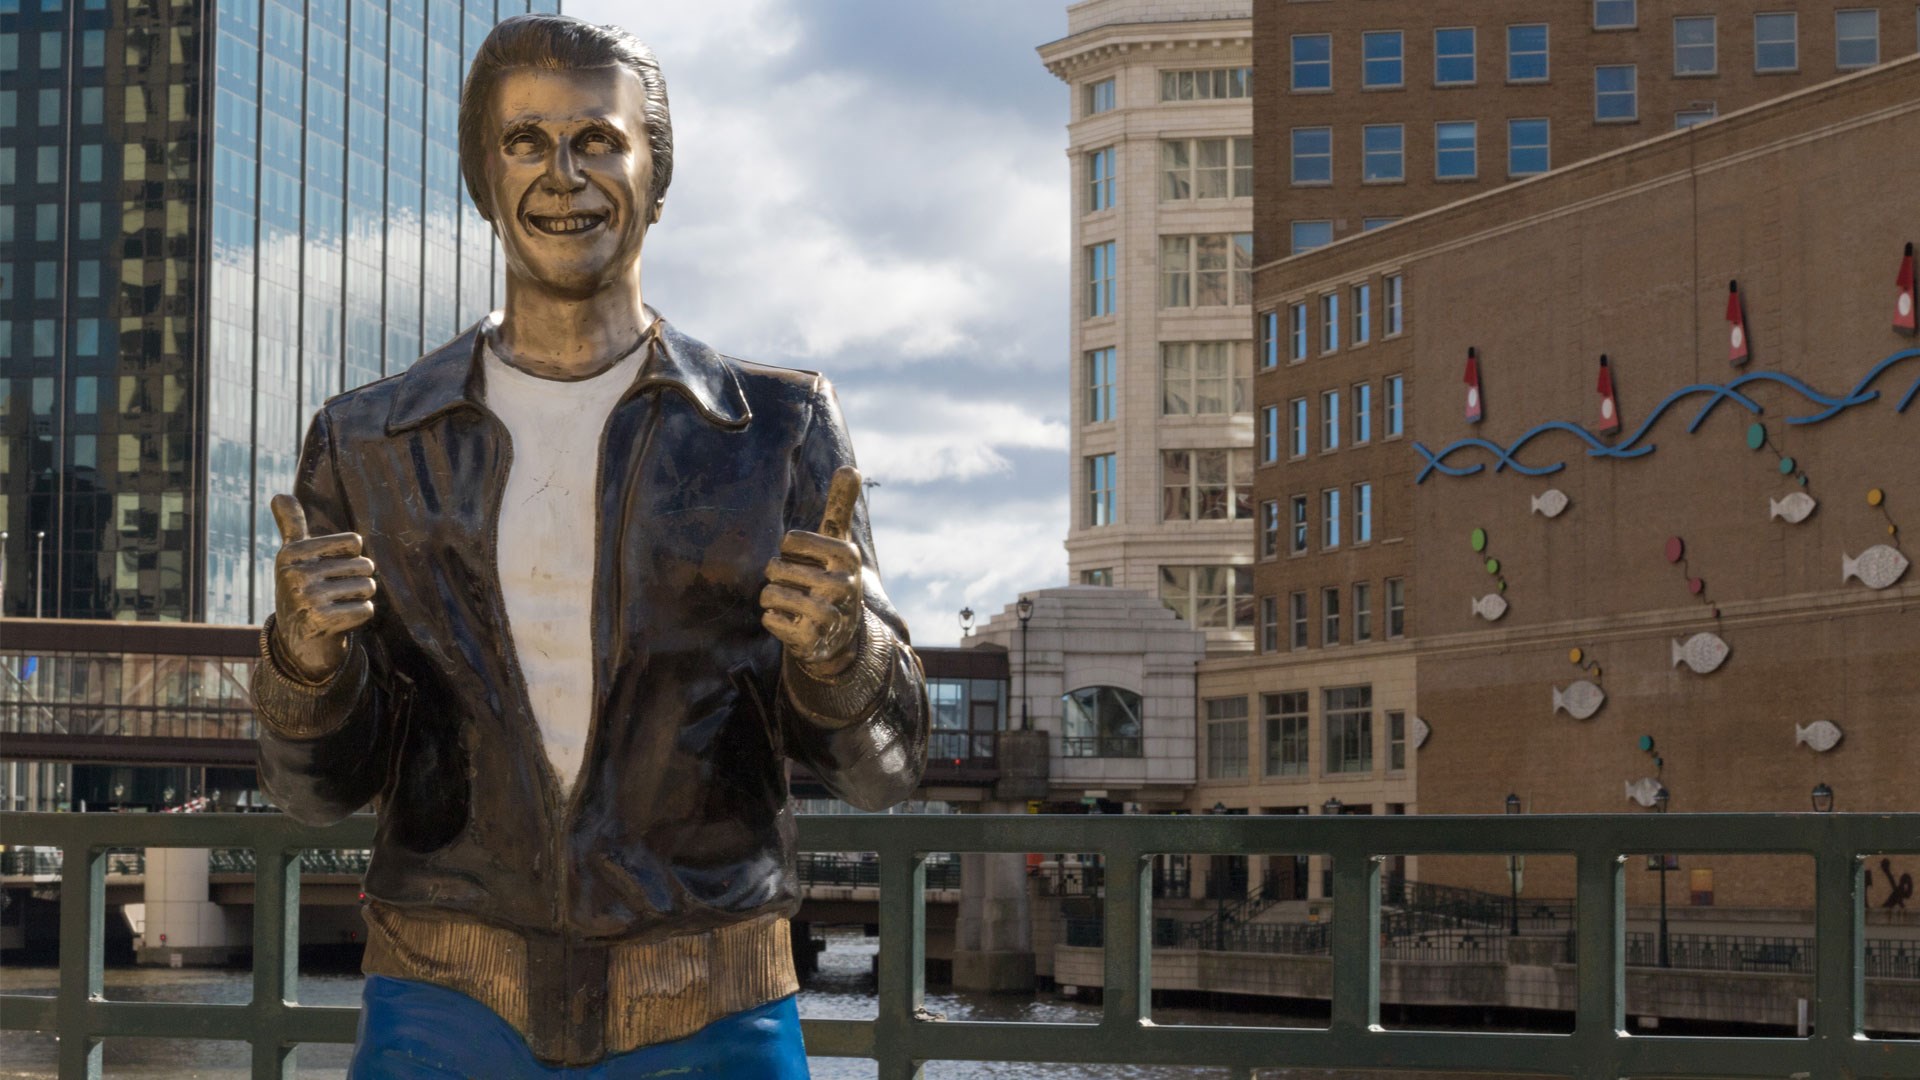 Which Fictional Character is Immortalized with a Statue in Downtown Milwaukee?